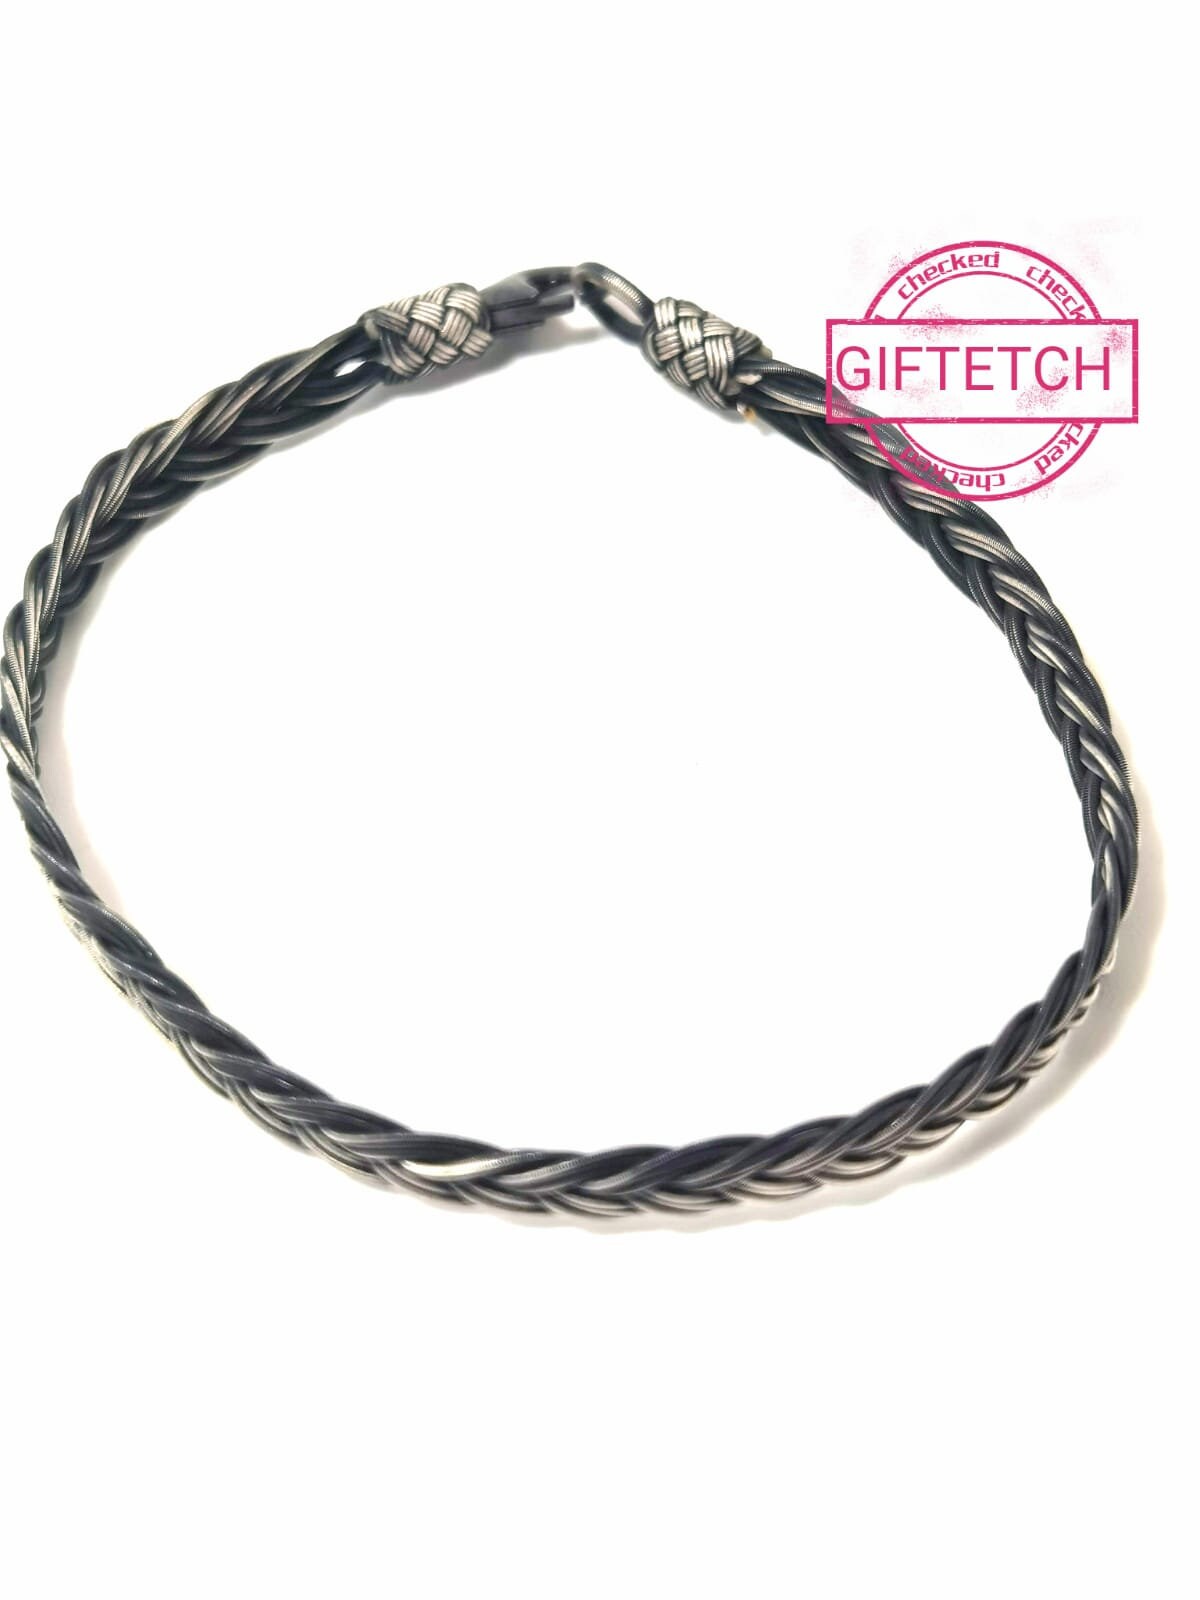 Oxidised Silver Kazaz Handwoven Braided Wire Wrapped Authentic Bracelet by Giftetch